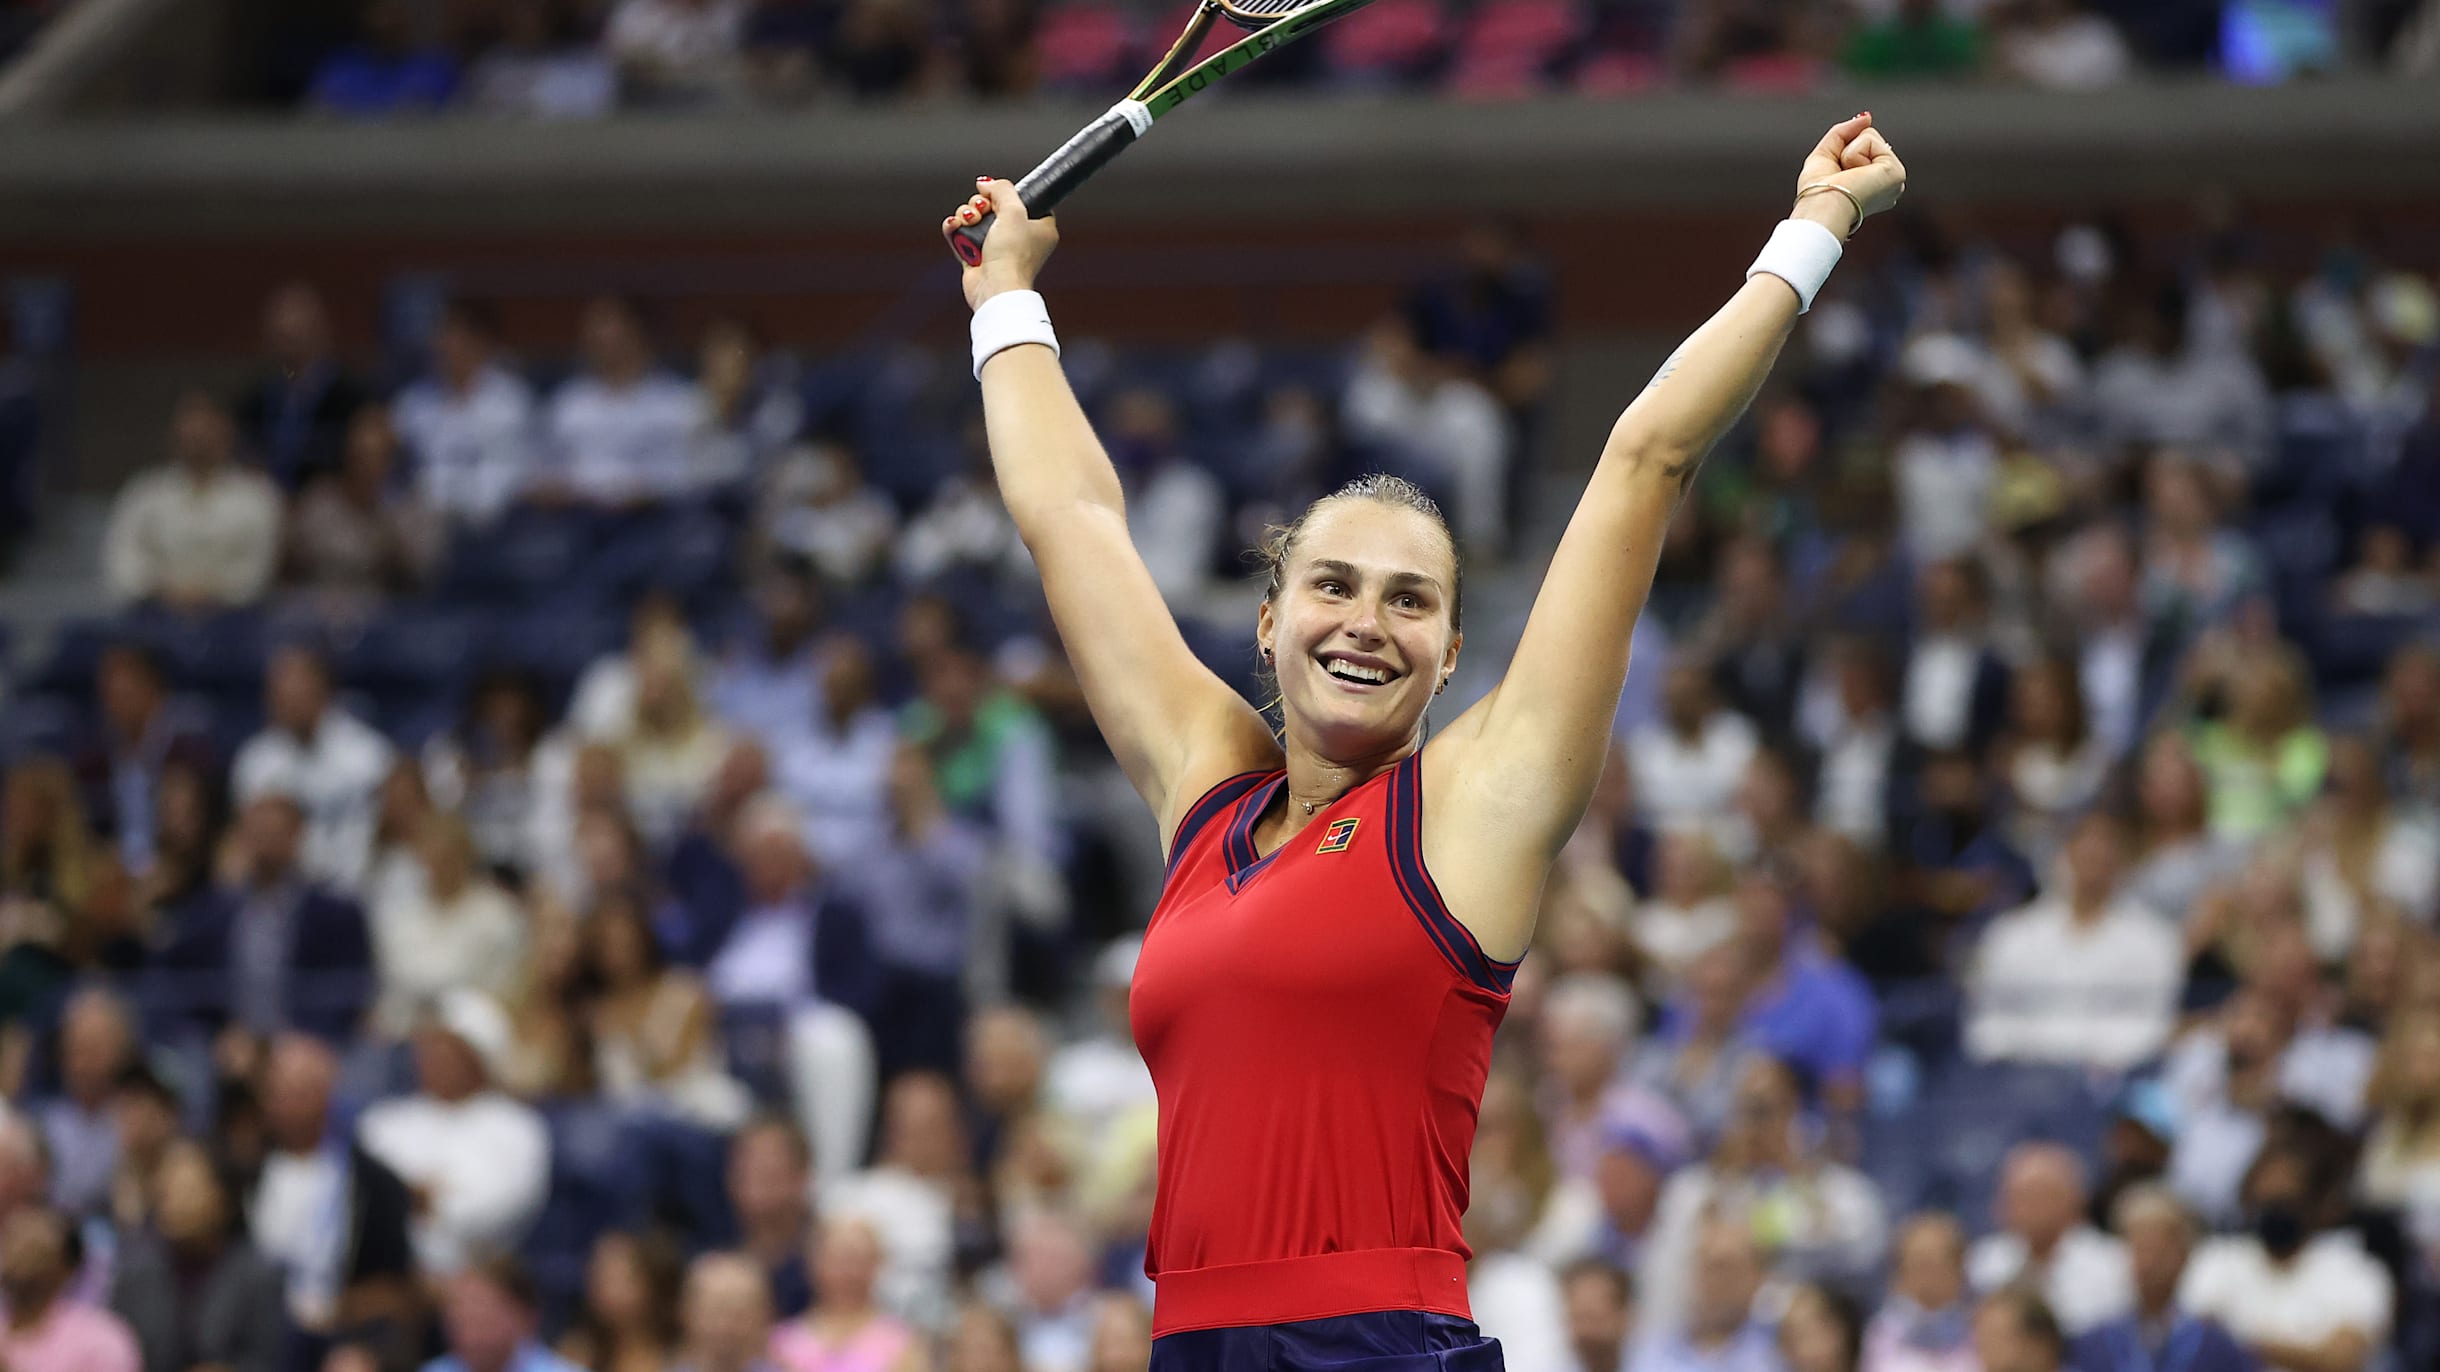 WTA Tour Finals 2021 in Guadalajara, Mexico Preview, Schedule and Stars to Watch